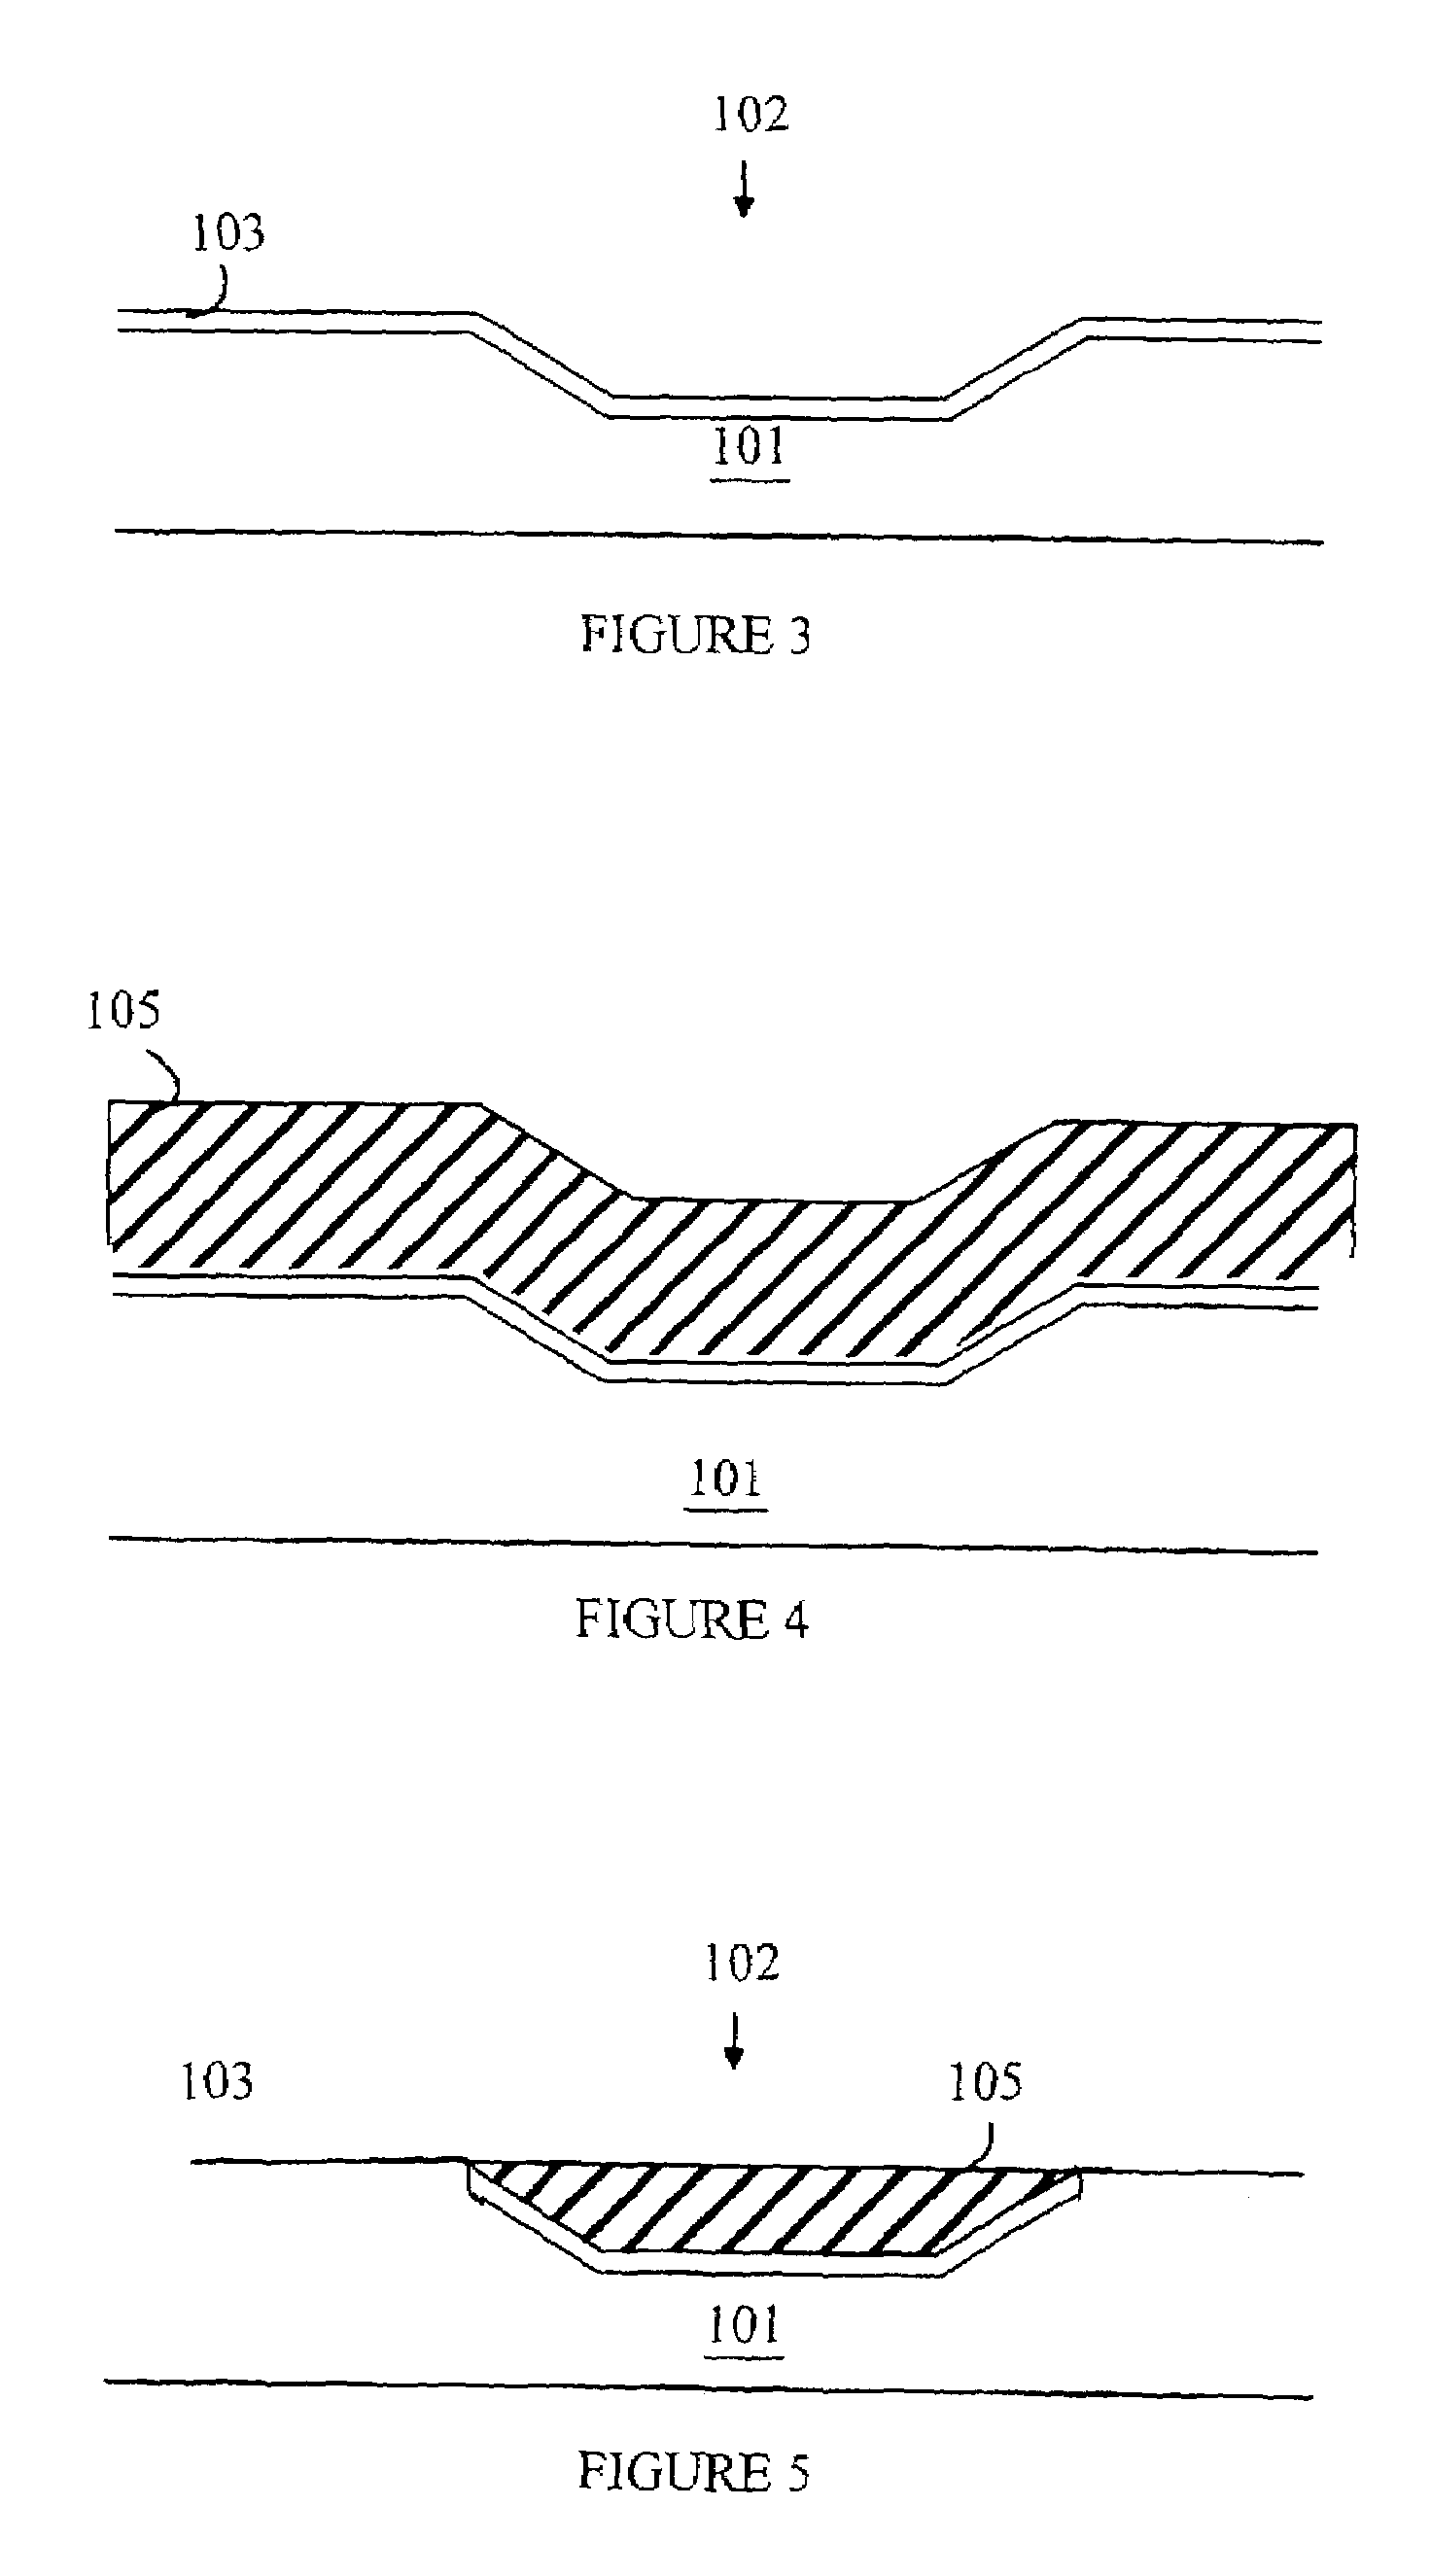 Method for fabricating an acoustical resonator on a substrate